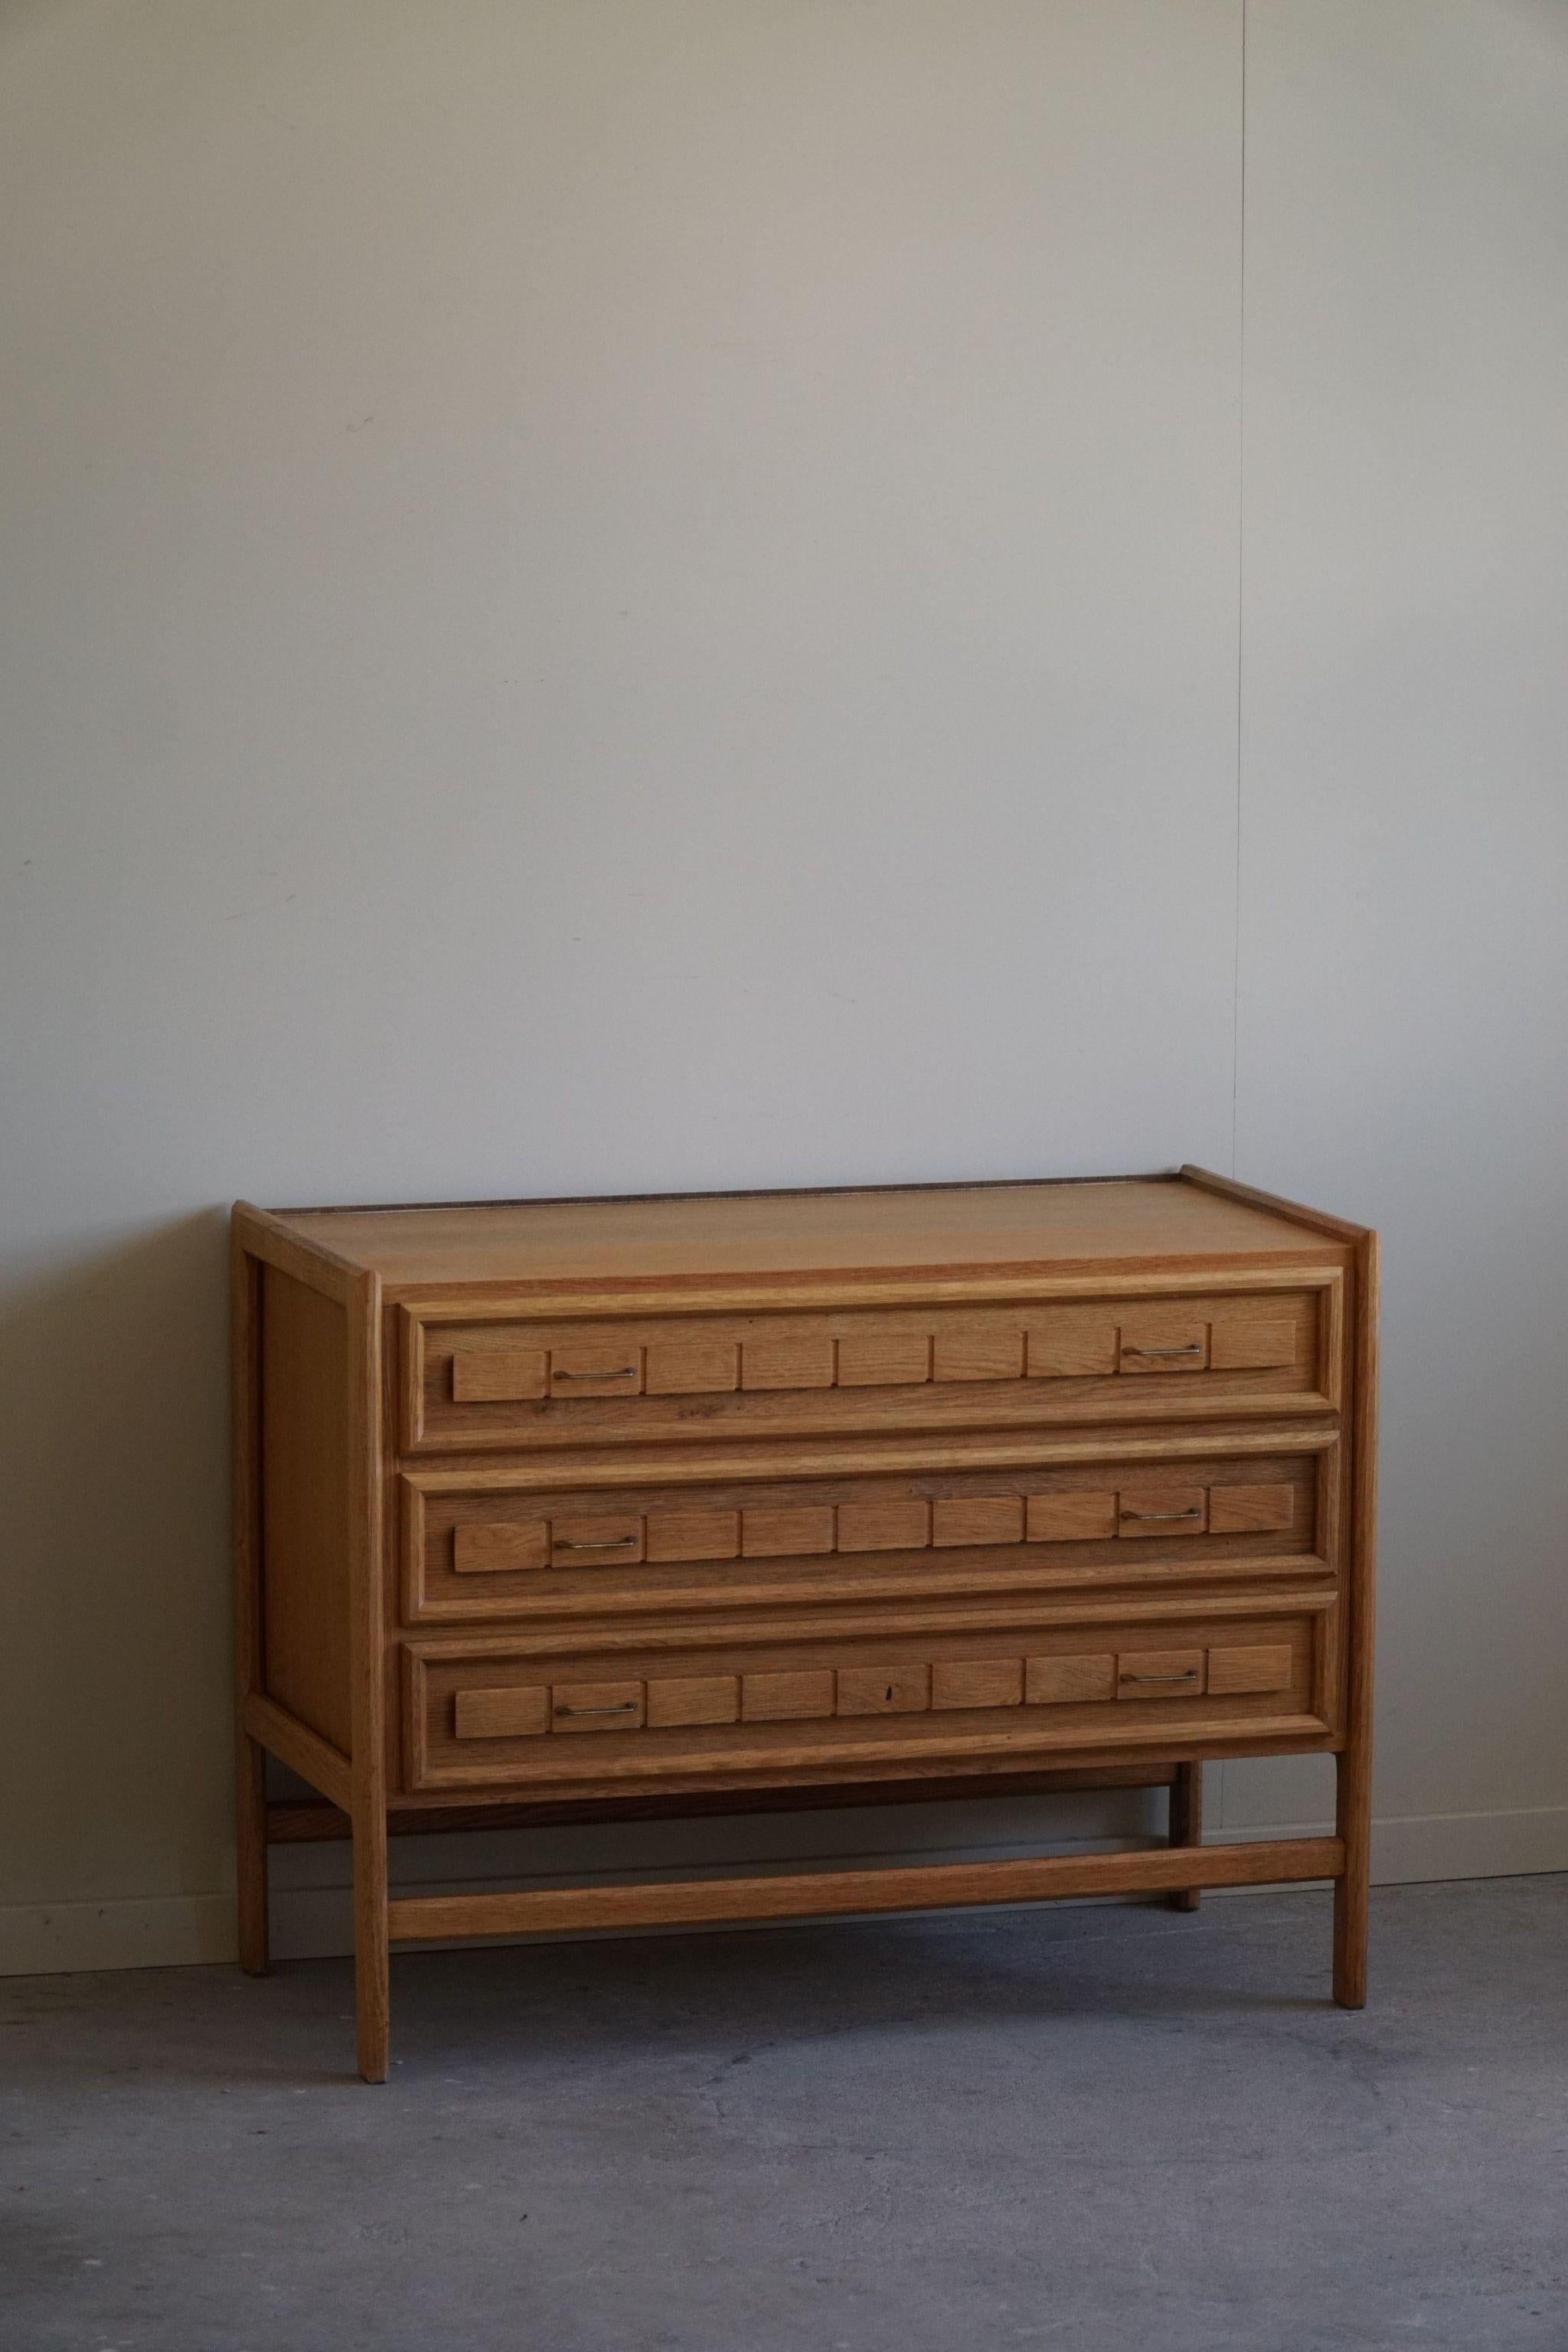 20th Century Mid-Century Modern, Chest of Drawers in Oak, By a Danish Cabinetmaker in 1960s For Sale